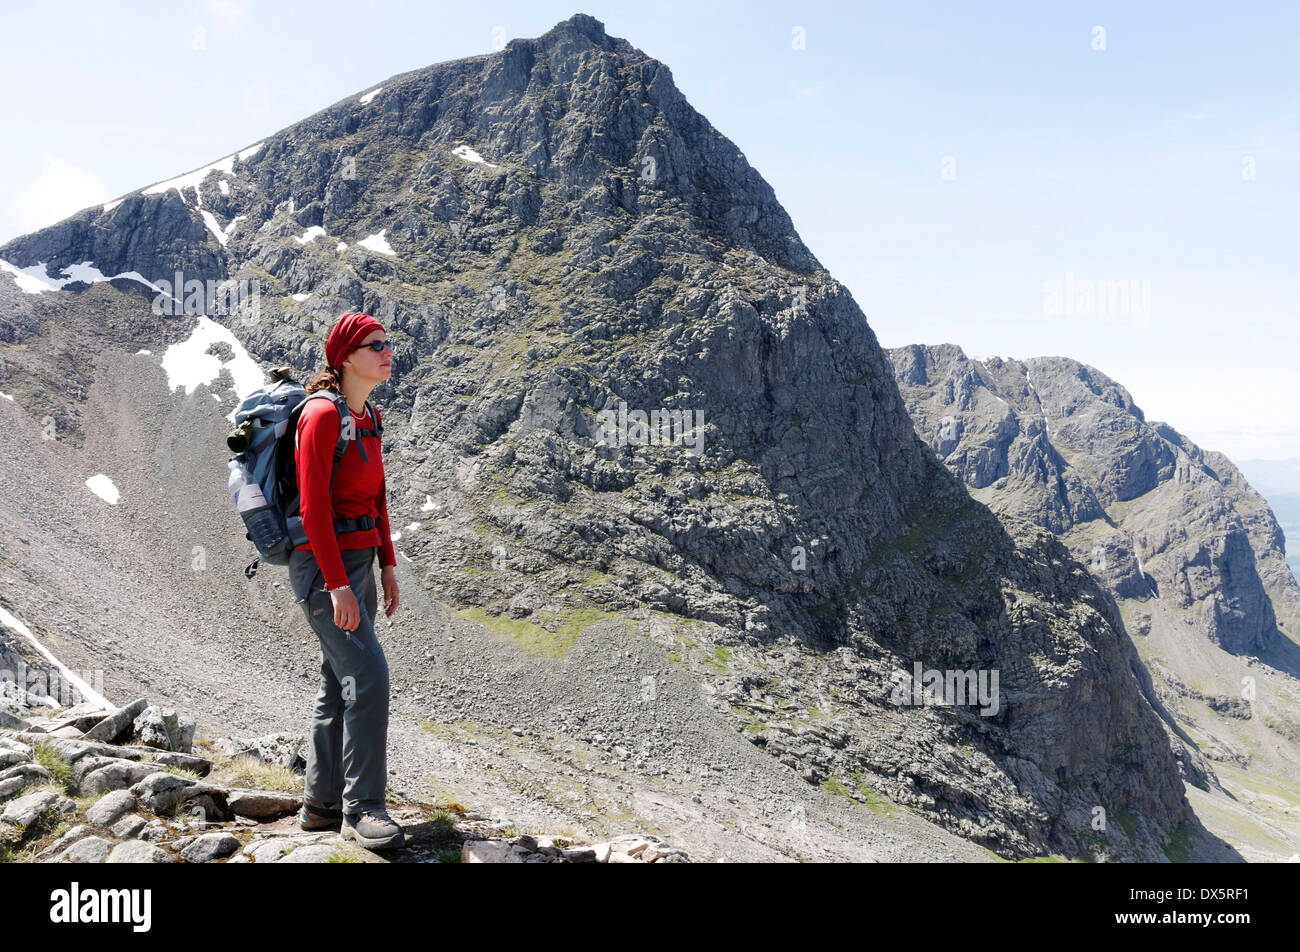 A hillwalker on the Carn Mor Dearg (CMD) arete route of Ben Nevis in the Scottish Highlands with the summit of Ben Nevis beyond Stock Photo